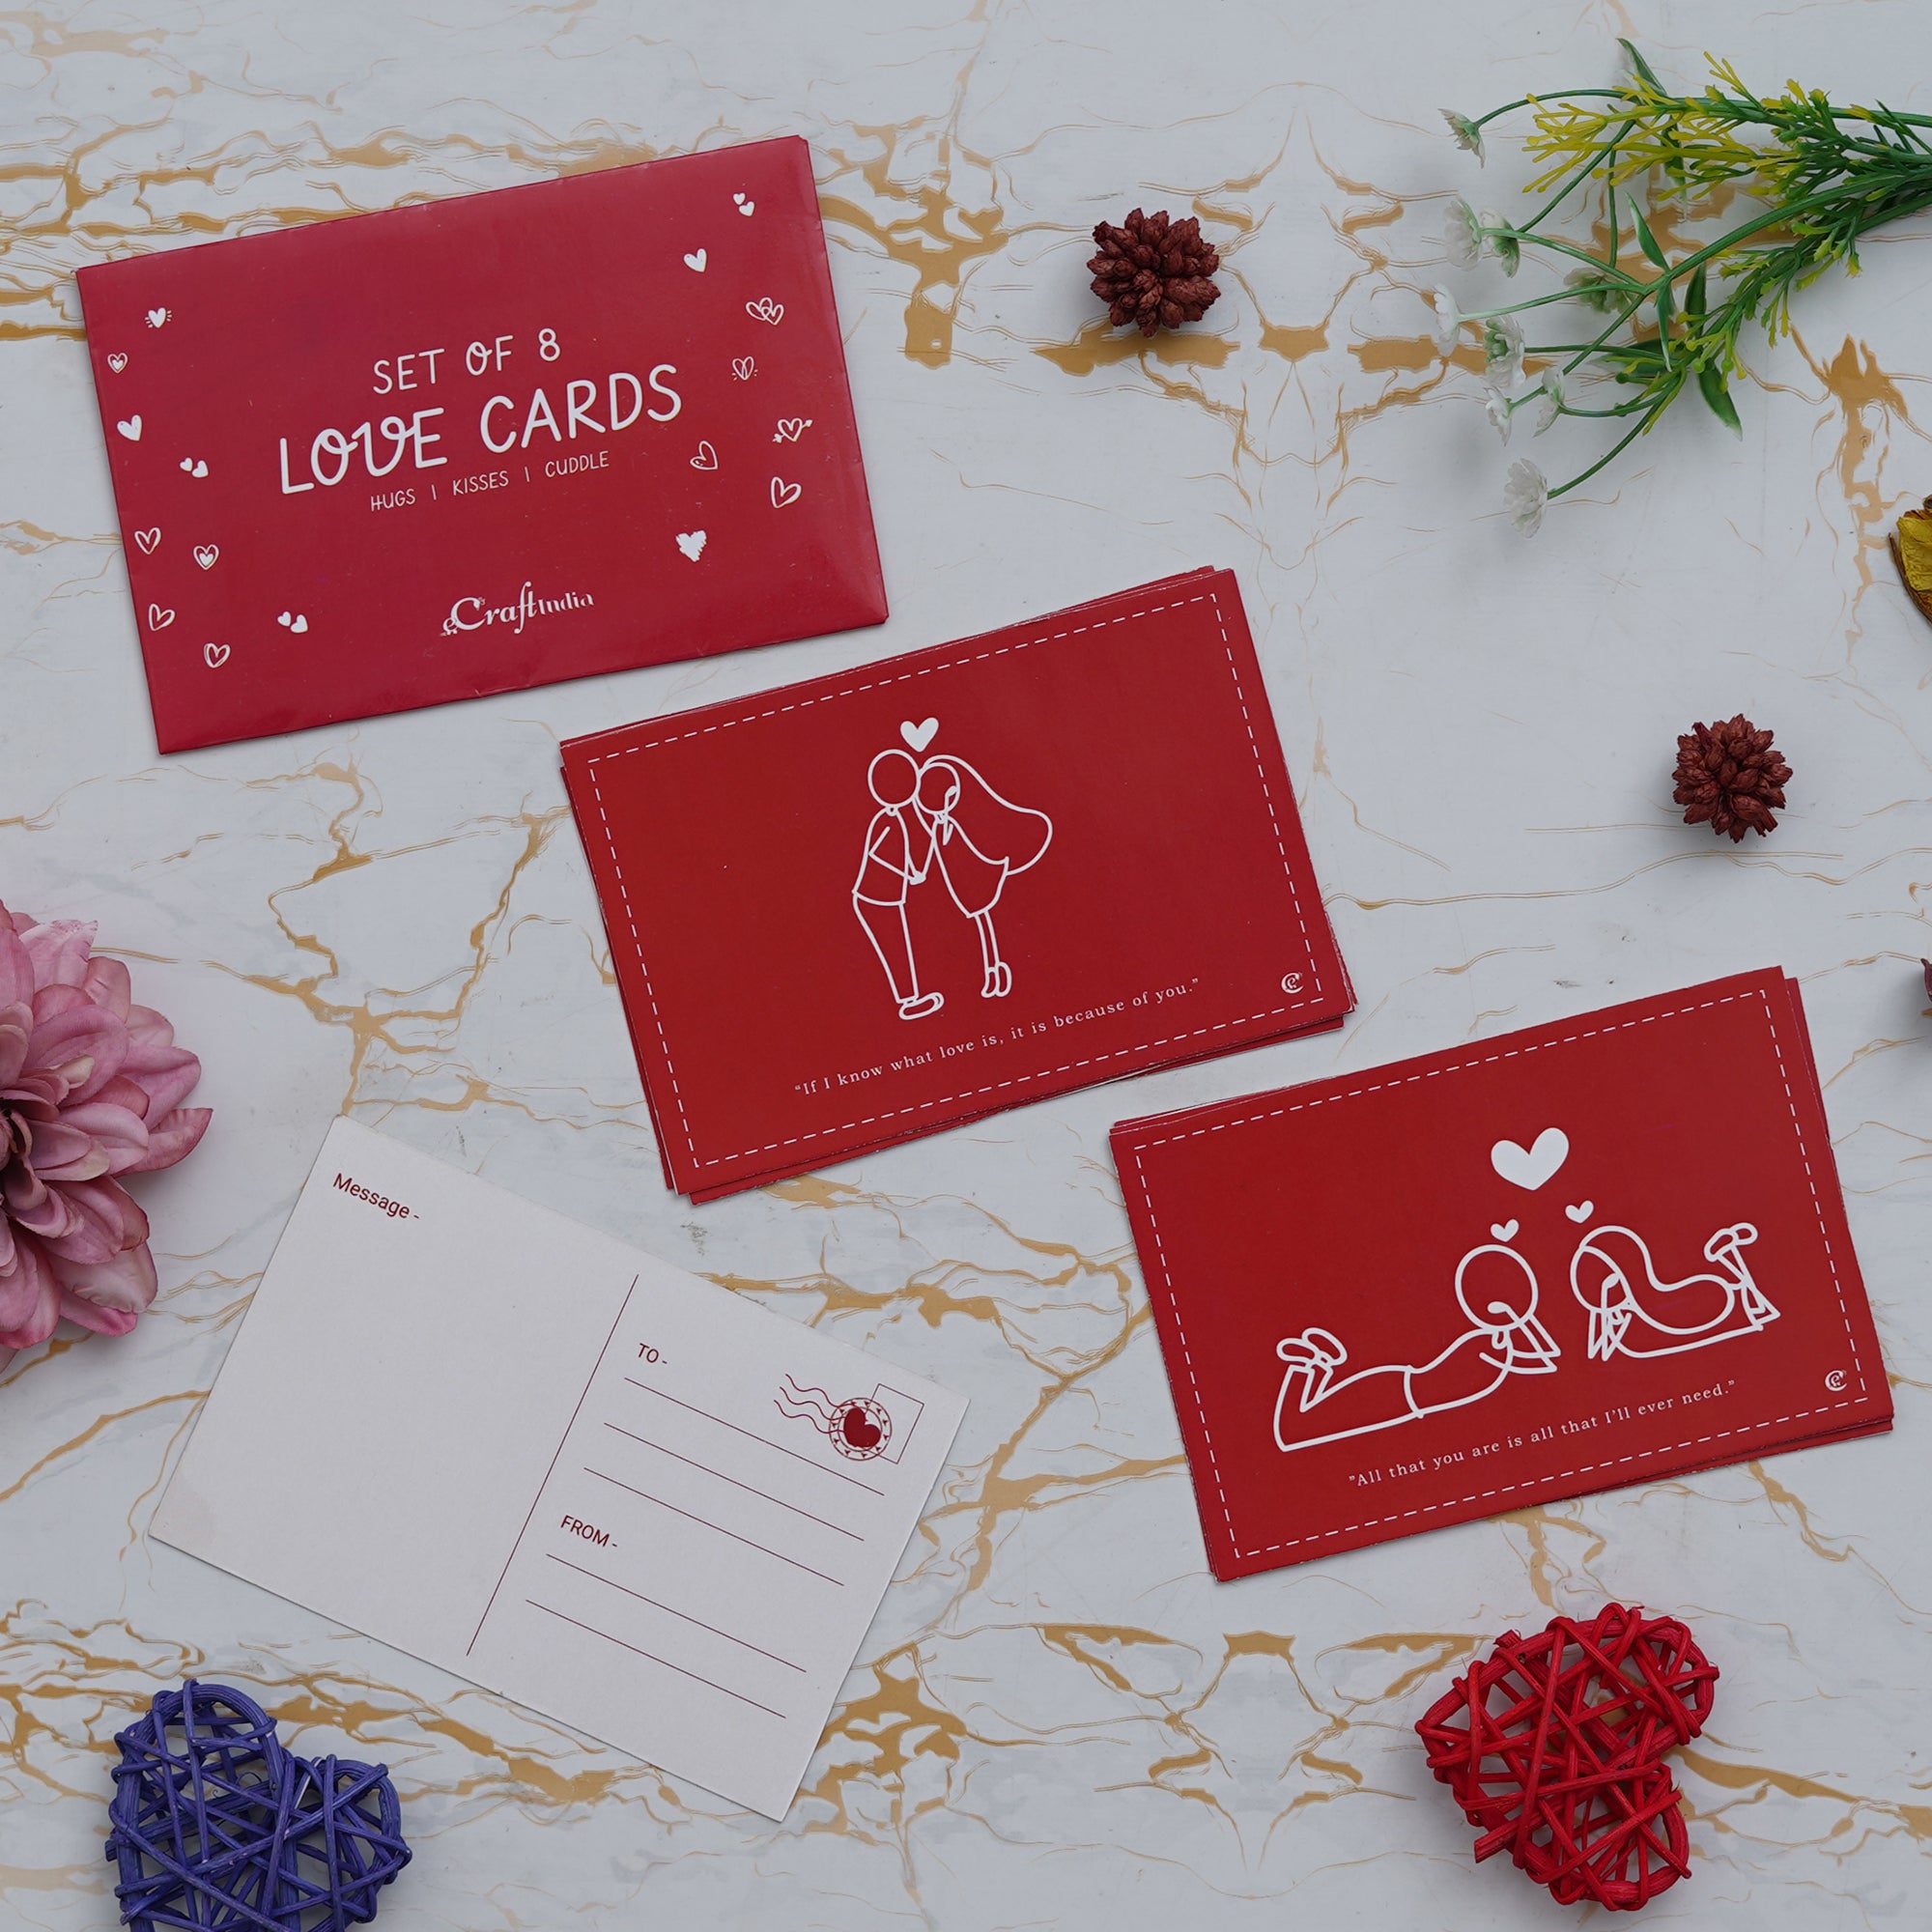 Valentine Combo of Pack of 8 Love Gift Cards, Red Gift Box with Teddy & Roses, Hands Showcasing Red Heart Gift Set 1